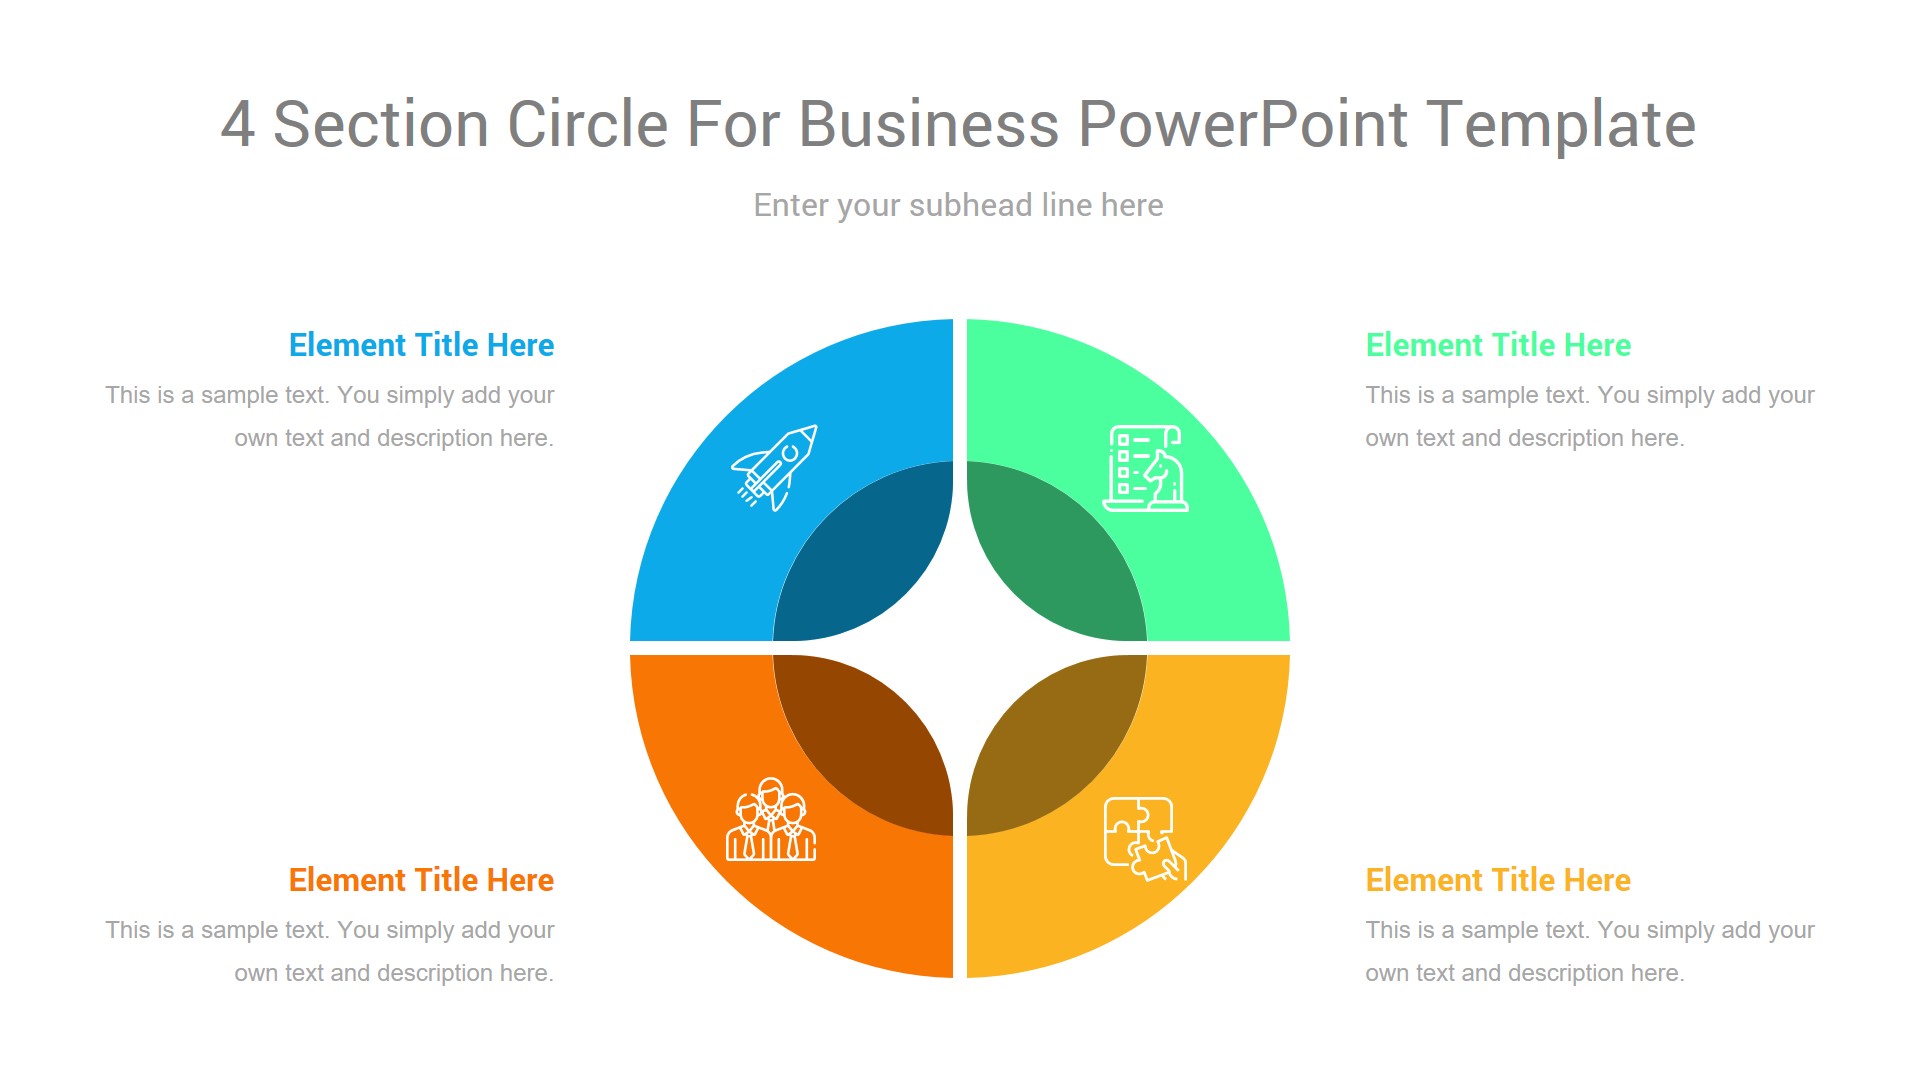 4 Section circle for business powerpoint template